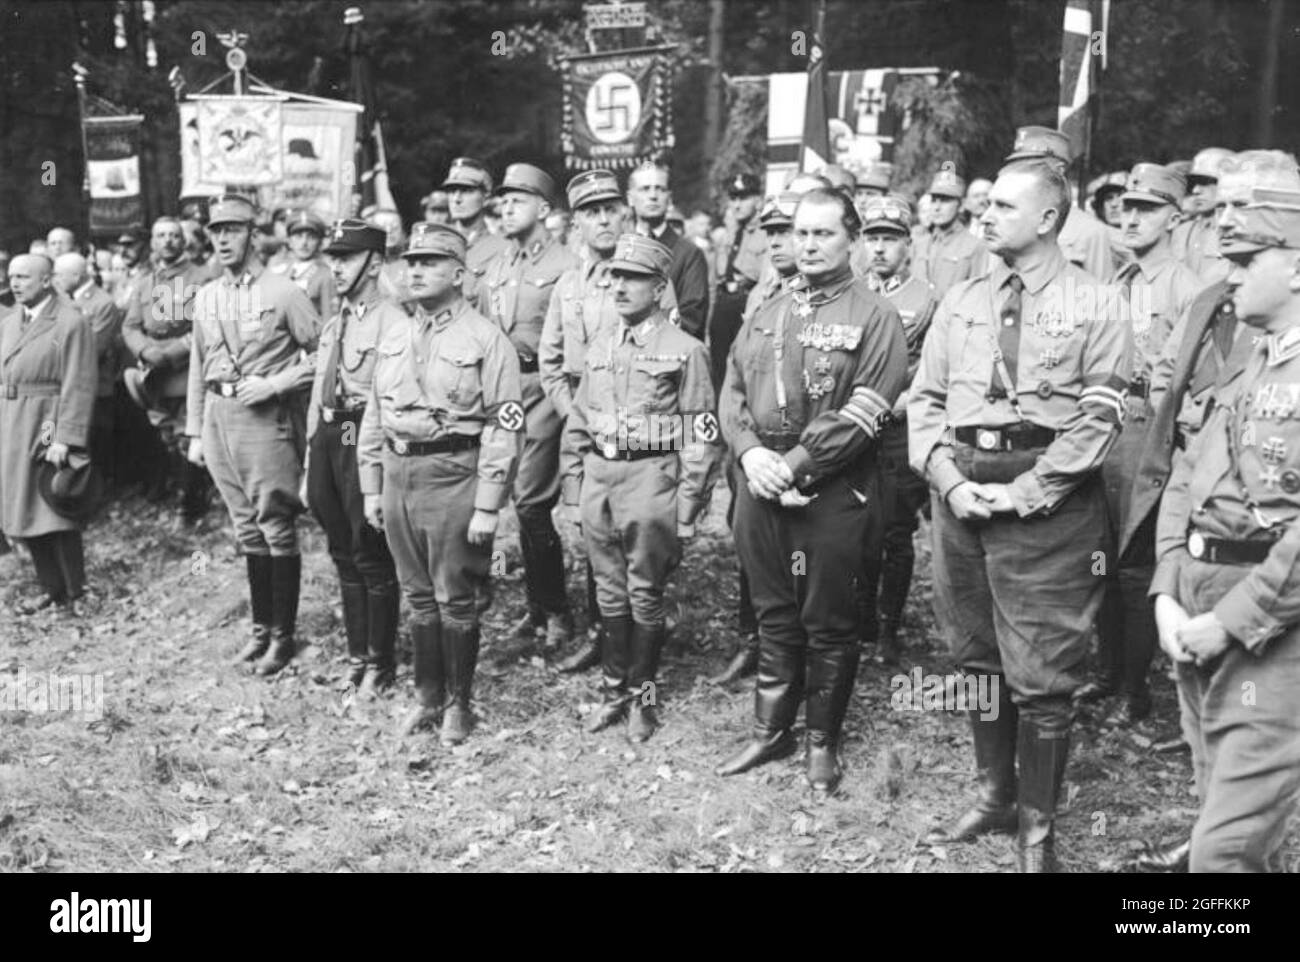 Nazis alongside members of the far-right reactionary and monarchist German National People's Party (DNVP) during the brief NSDAP–DNVP alliance in the Harzburg Front from 1931 to 1932. Credit : German Bundesarchiv Stock Photo